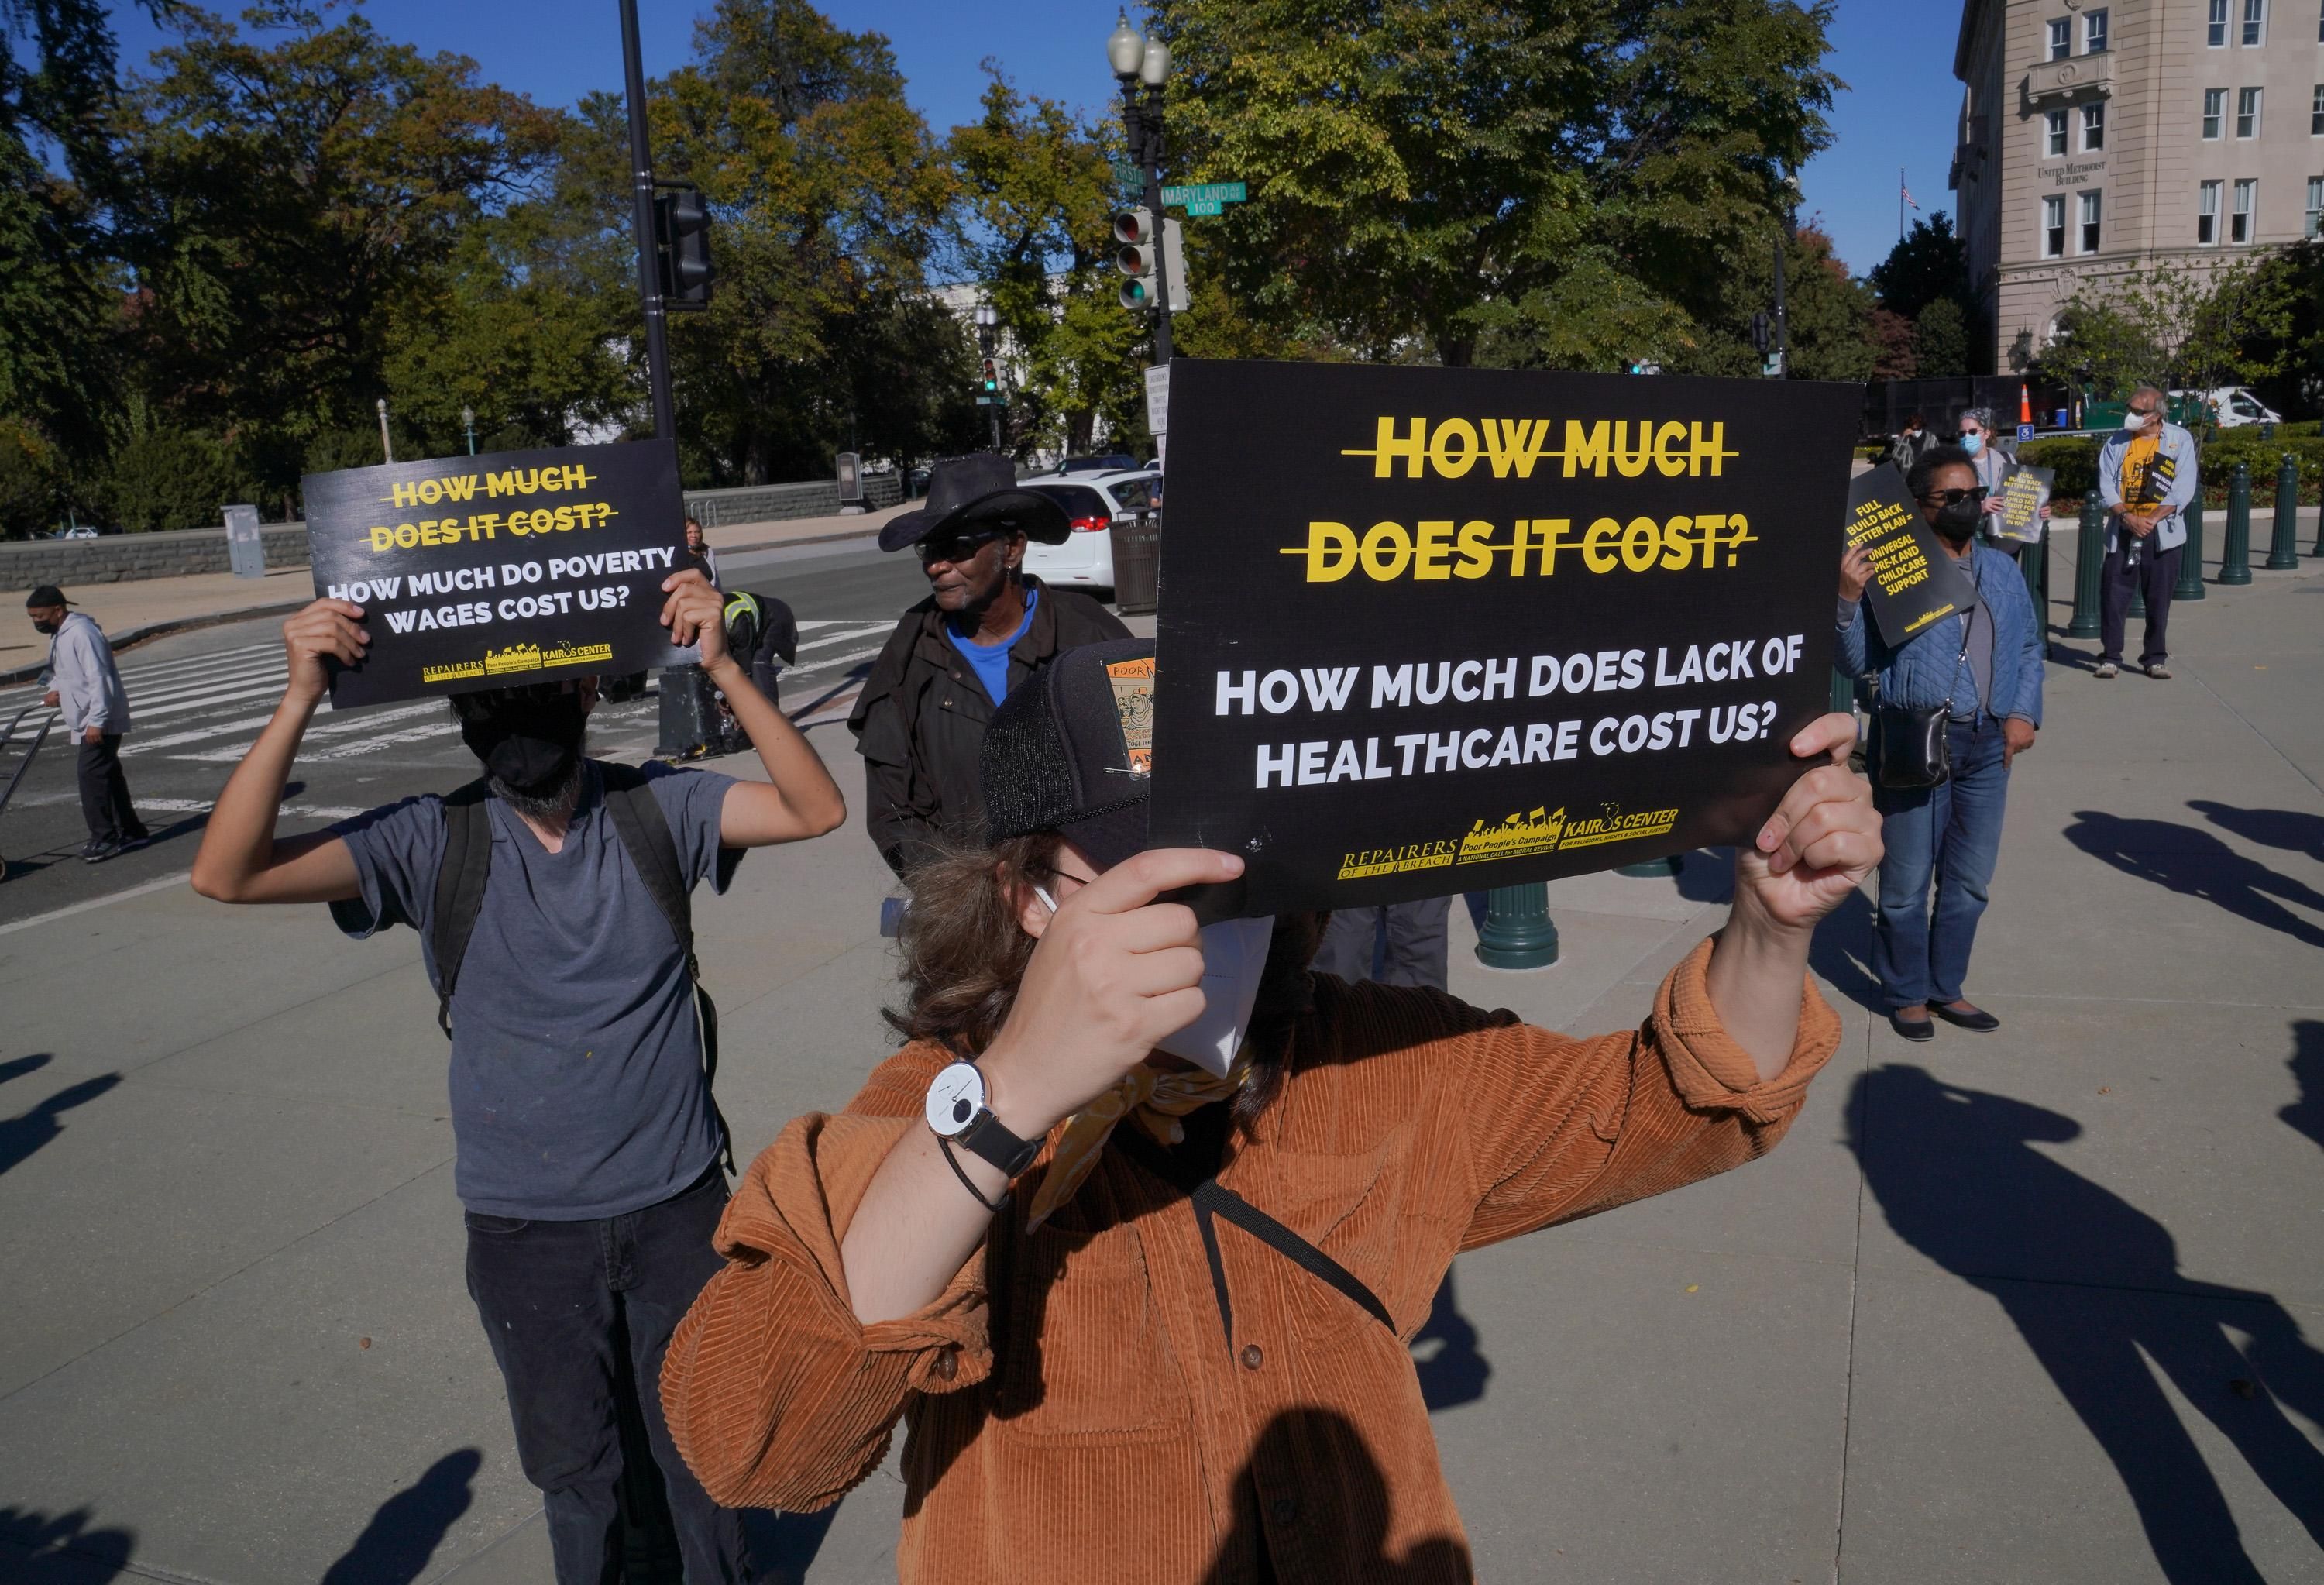 Individuals hold signs at a rally held by the Poor People's Campaign: A National Call For Moral Revival on October 27, 2021 in Washington, D.C. (Photo: Jemal Countess via Getty Images for Repairers Of The Breach)